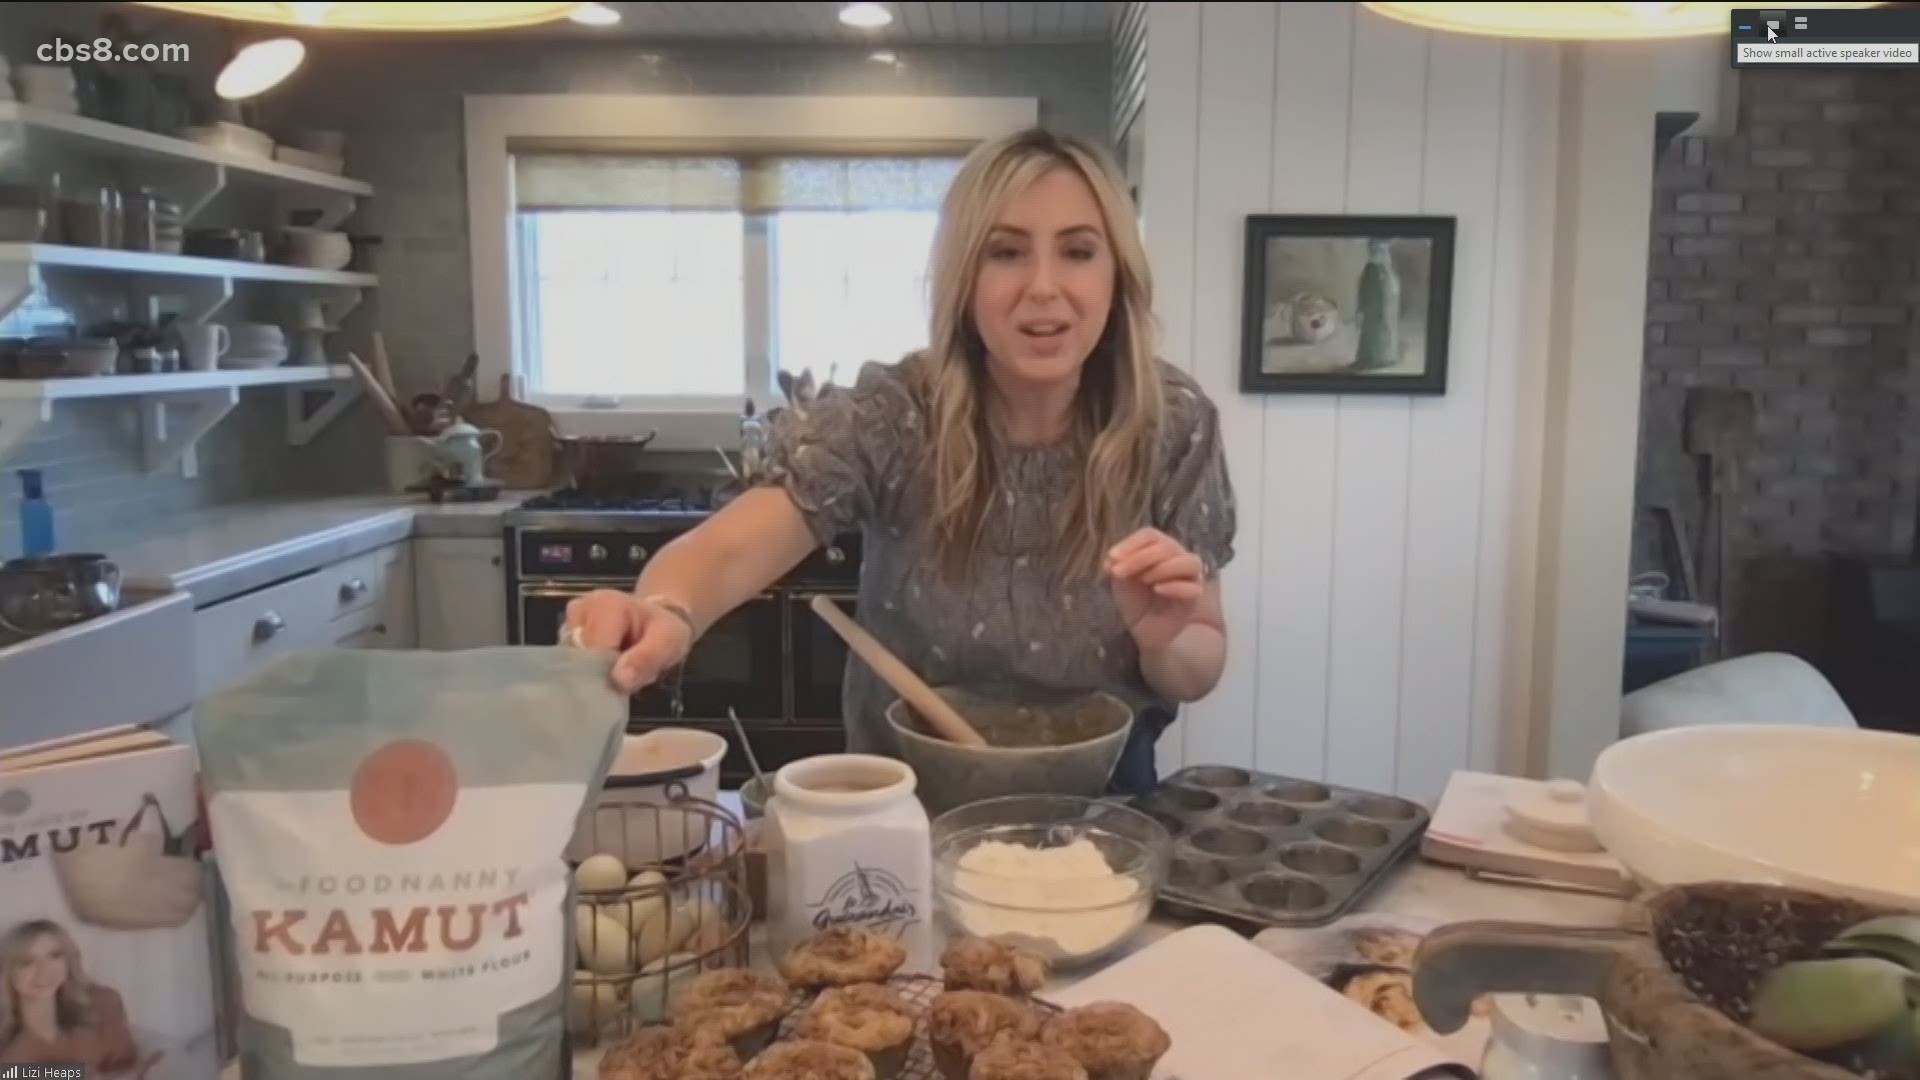 The Food Nanny, Lizi Heaps joined News 8 to share recipes and about her new cookbook 'For The Love of Kamut.'